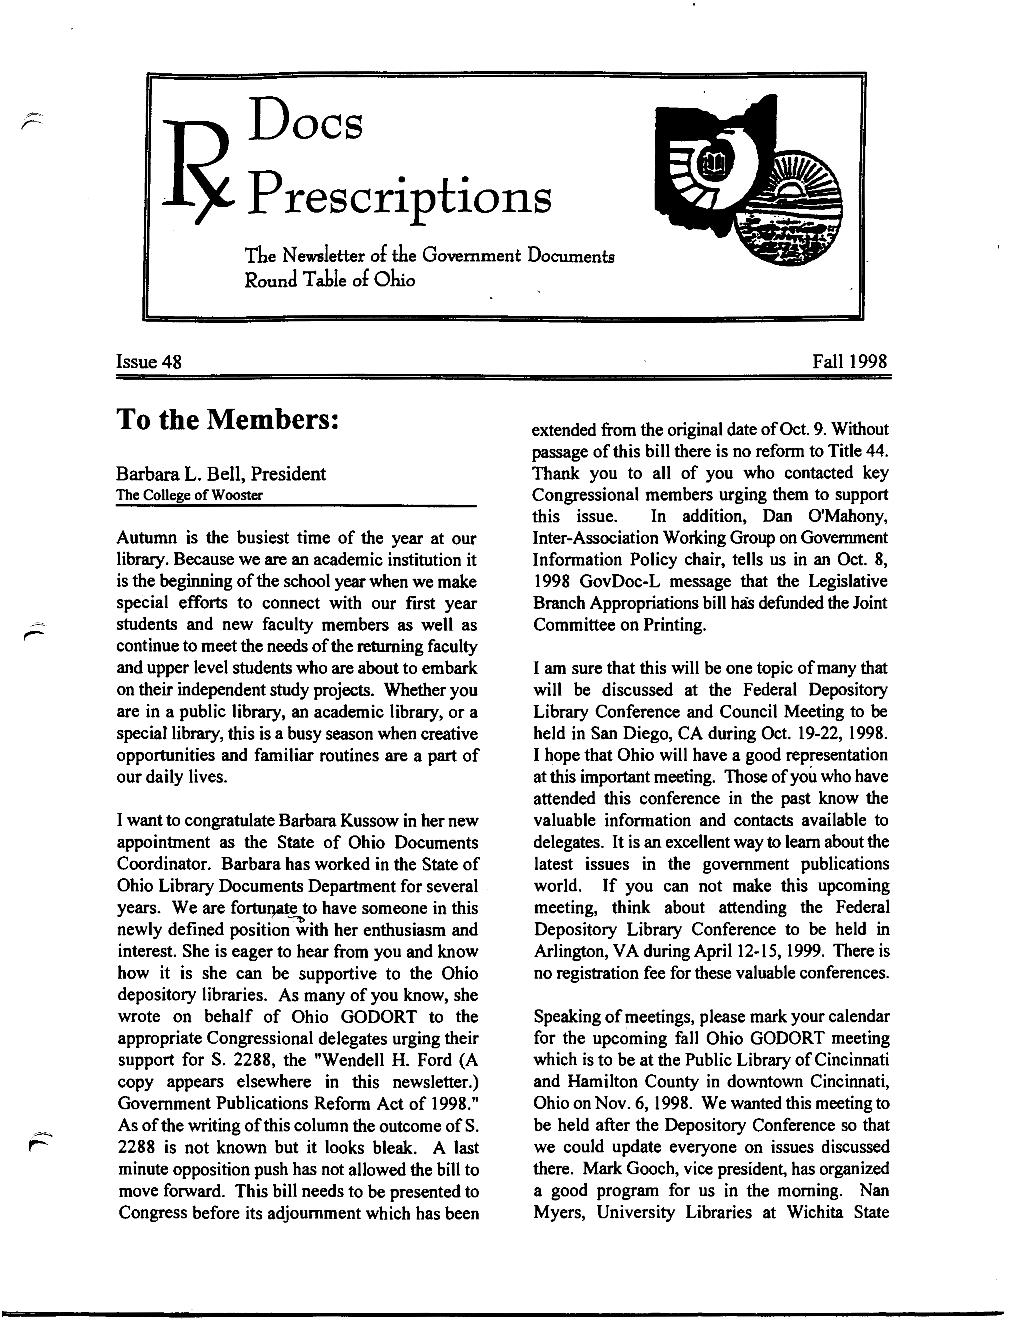 Prescriptions the Newsletter of the Government Documents Round Table of Ohio